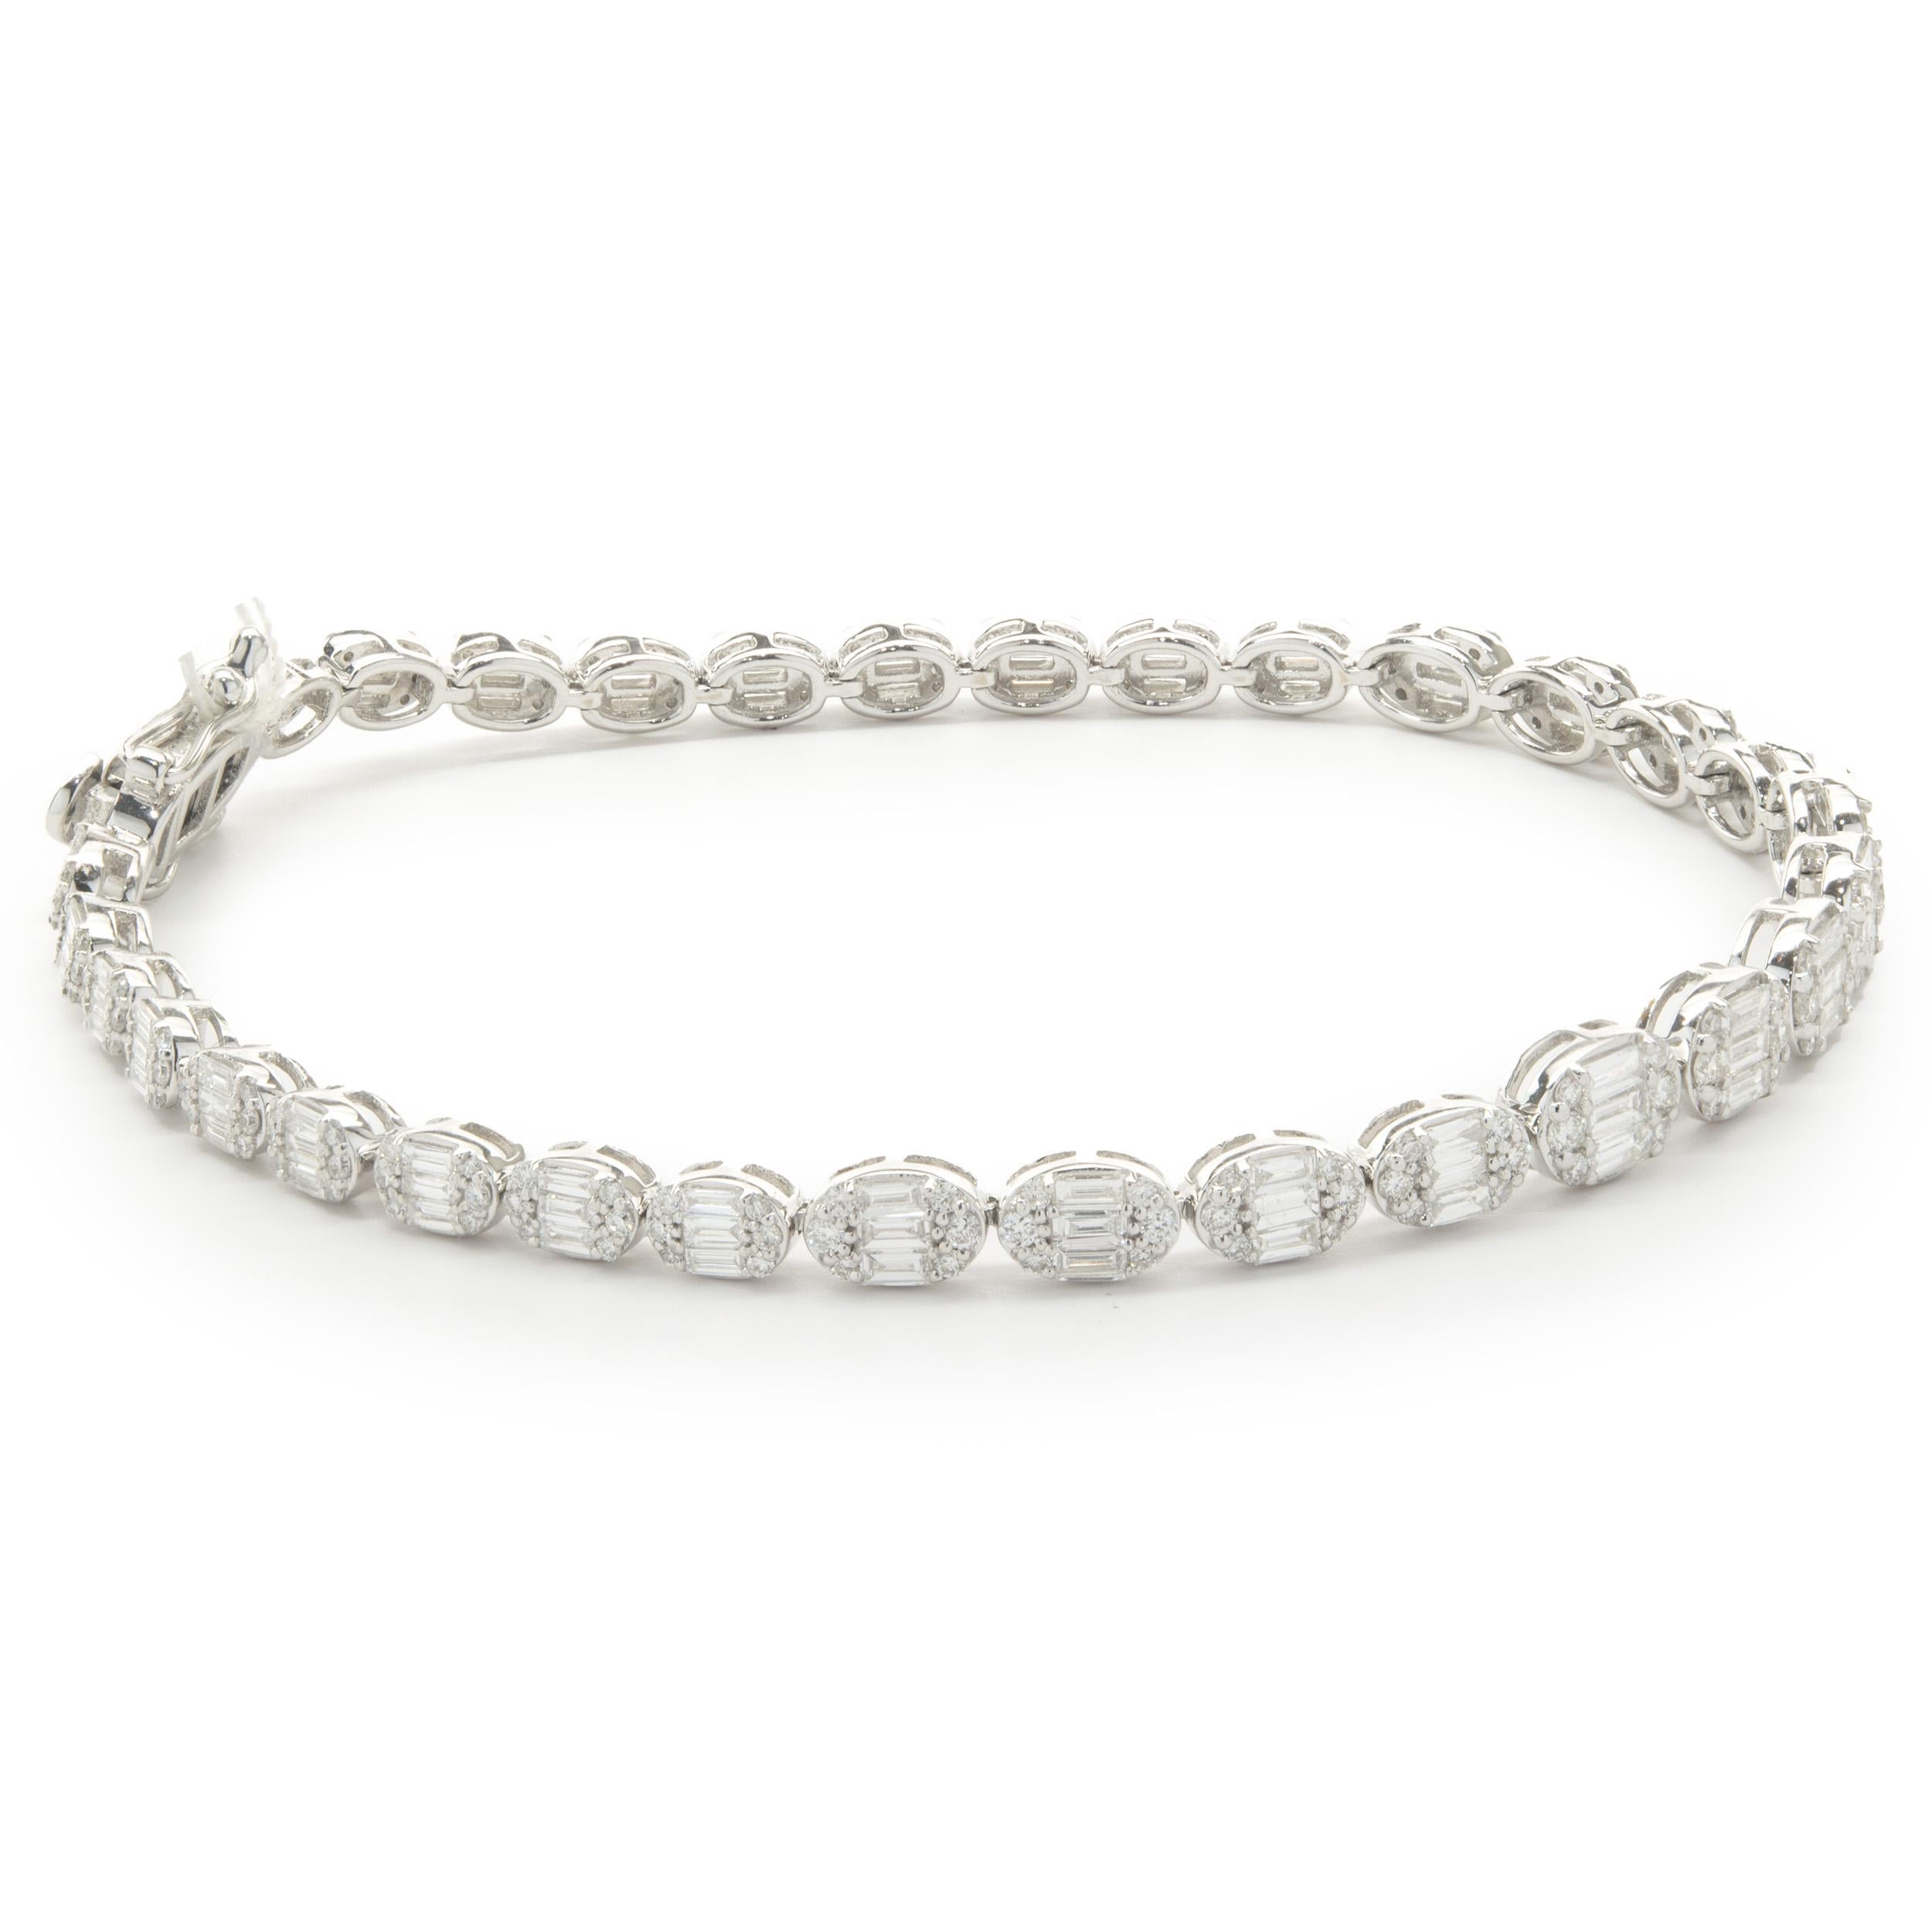 Designer: custom design
Material: 18K white gold
Diamond: 186 round brilliant cut = 0.80cttw
Color: G
Clarity: SI1
Diamonds:  93 baguette cut = 1.42cttw
Color: G 
Clarity: SI1
Dimensions: bracelet measures 7.5-inches in length
Weight: 10.85 grams